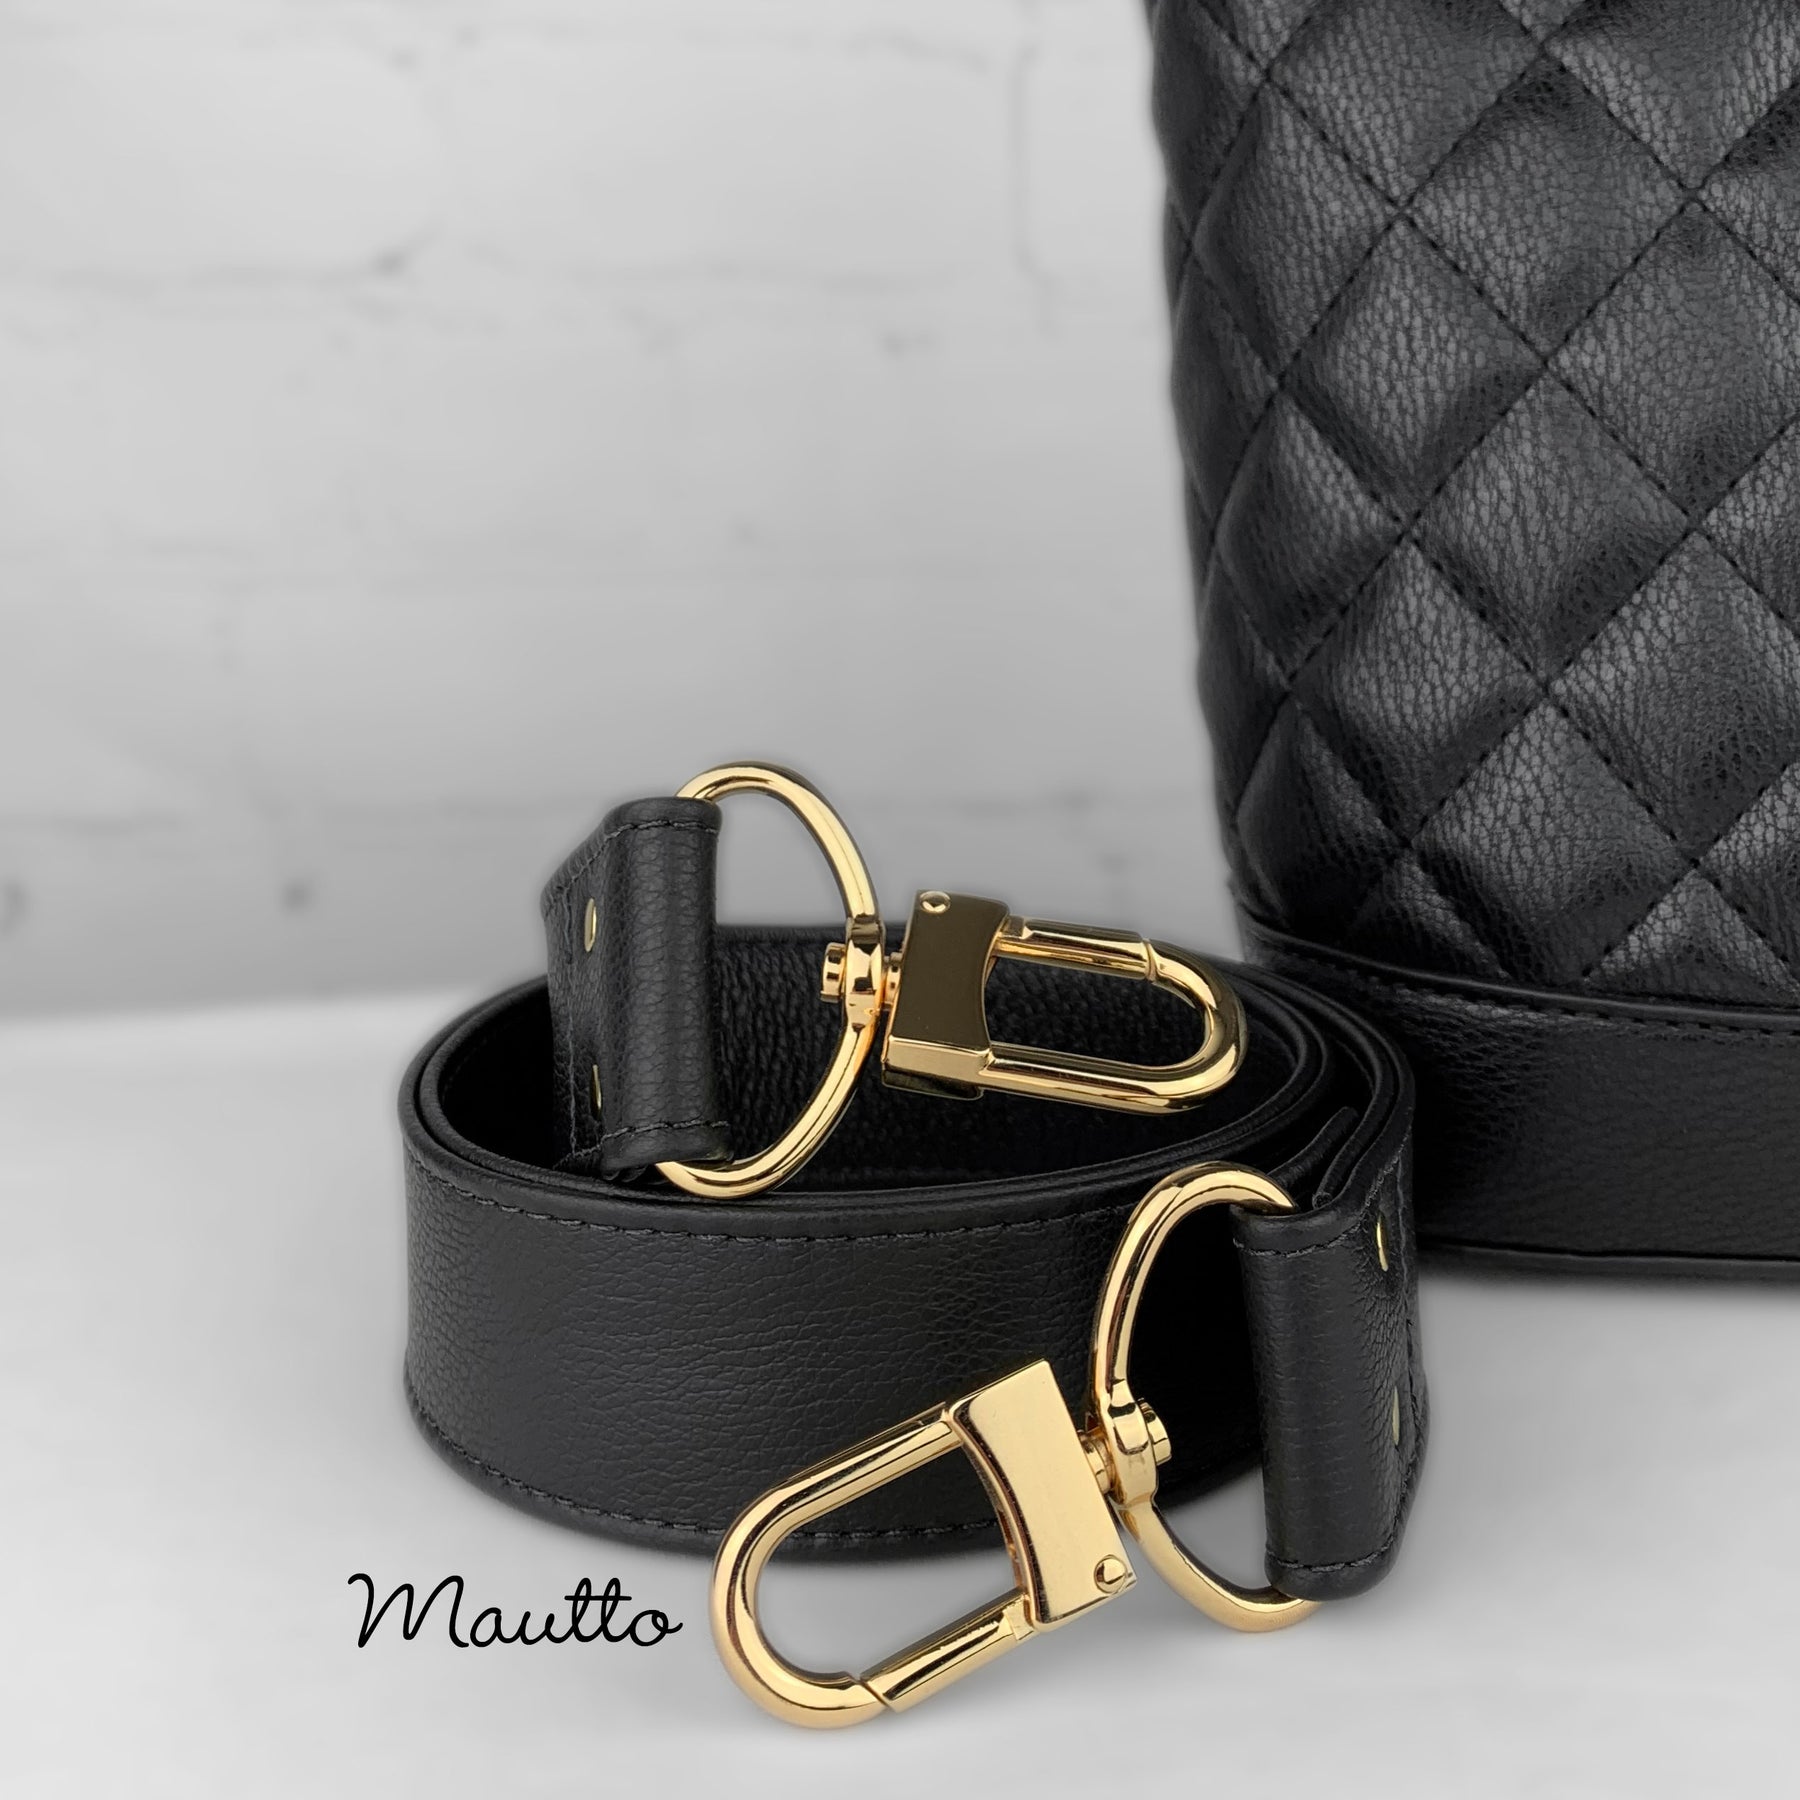 Mautto Wide Leather Shoulder Strap - Choose Leather Color & Gold-Tone Clips Dark Brown Leather / #14 Gold-Tone